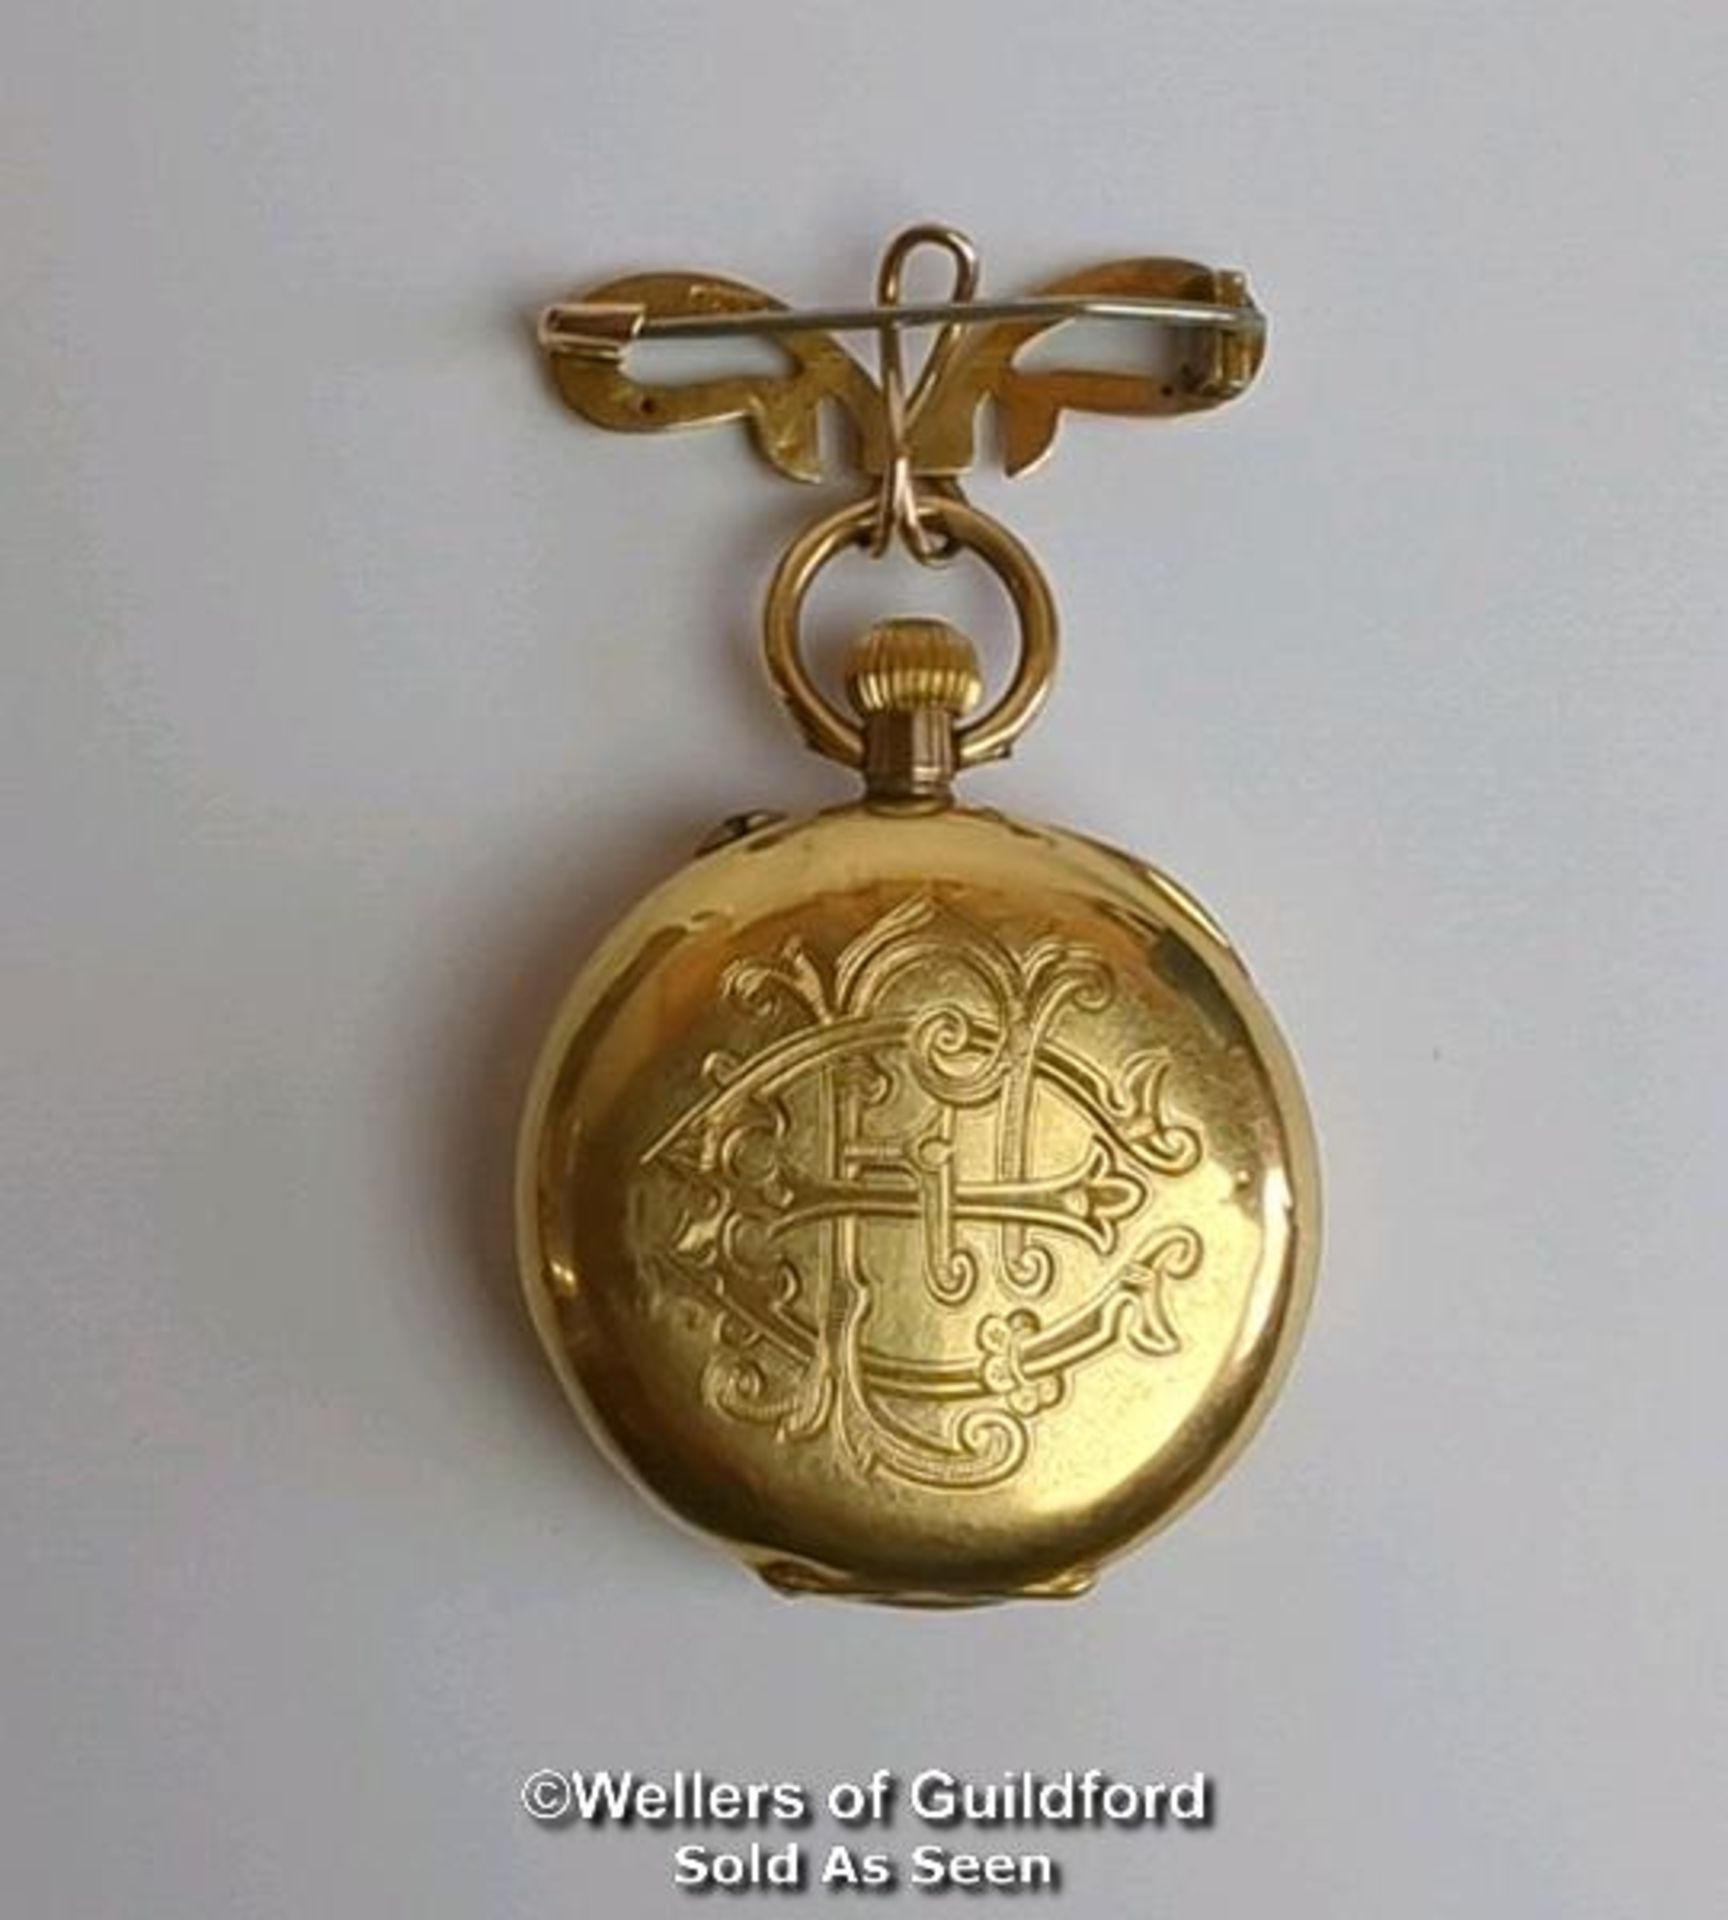 Half hunter fob watch with white enamel dial and entwinded monogrammed initials enscribed on - Image 5 of 7